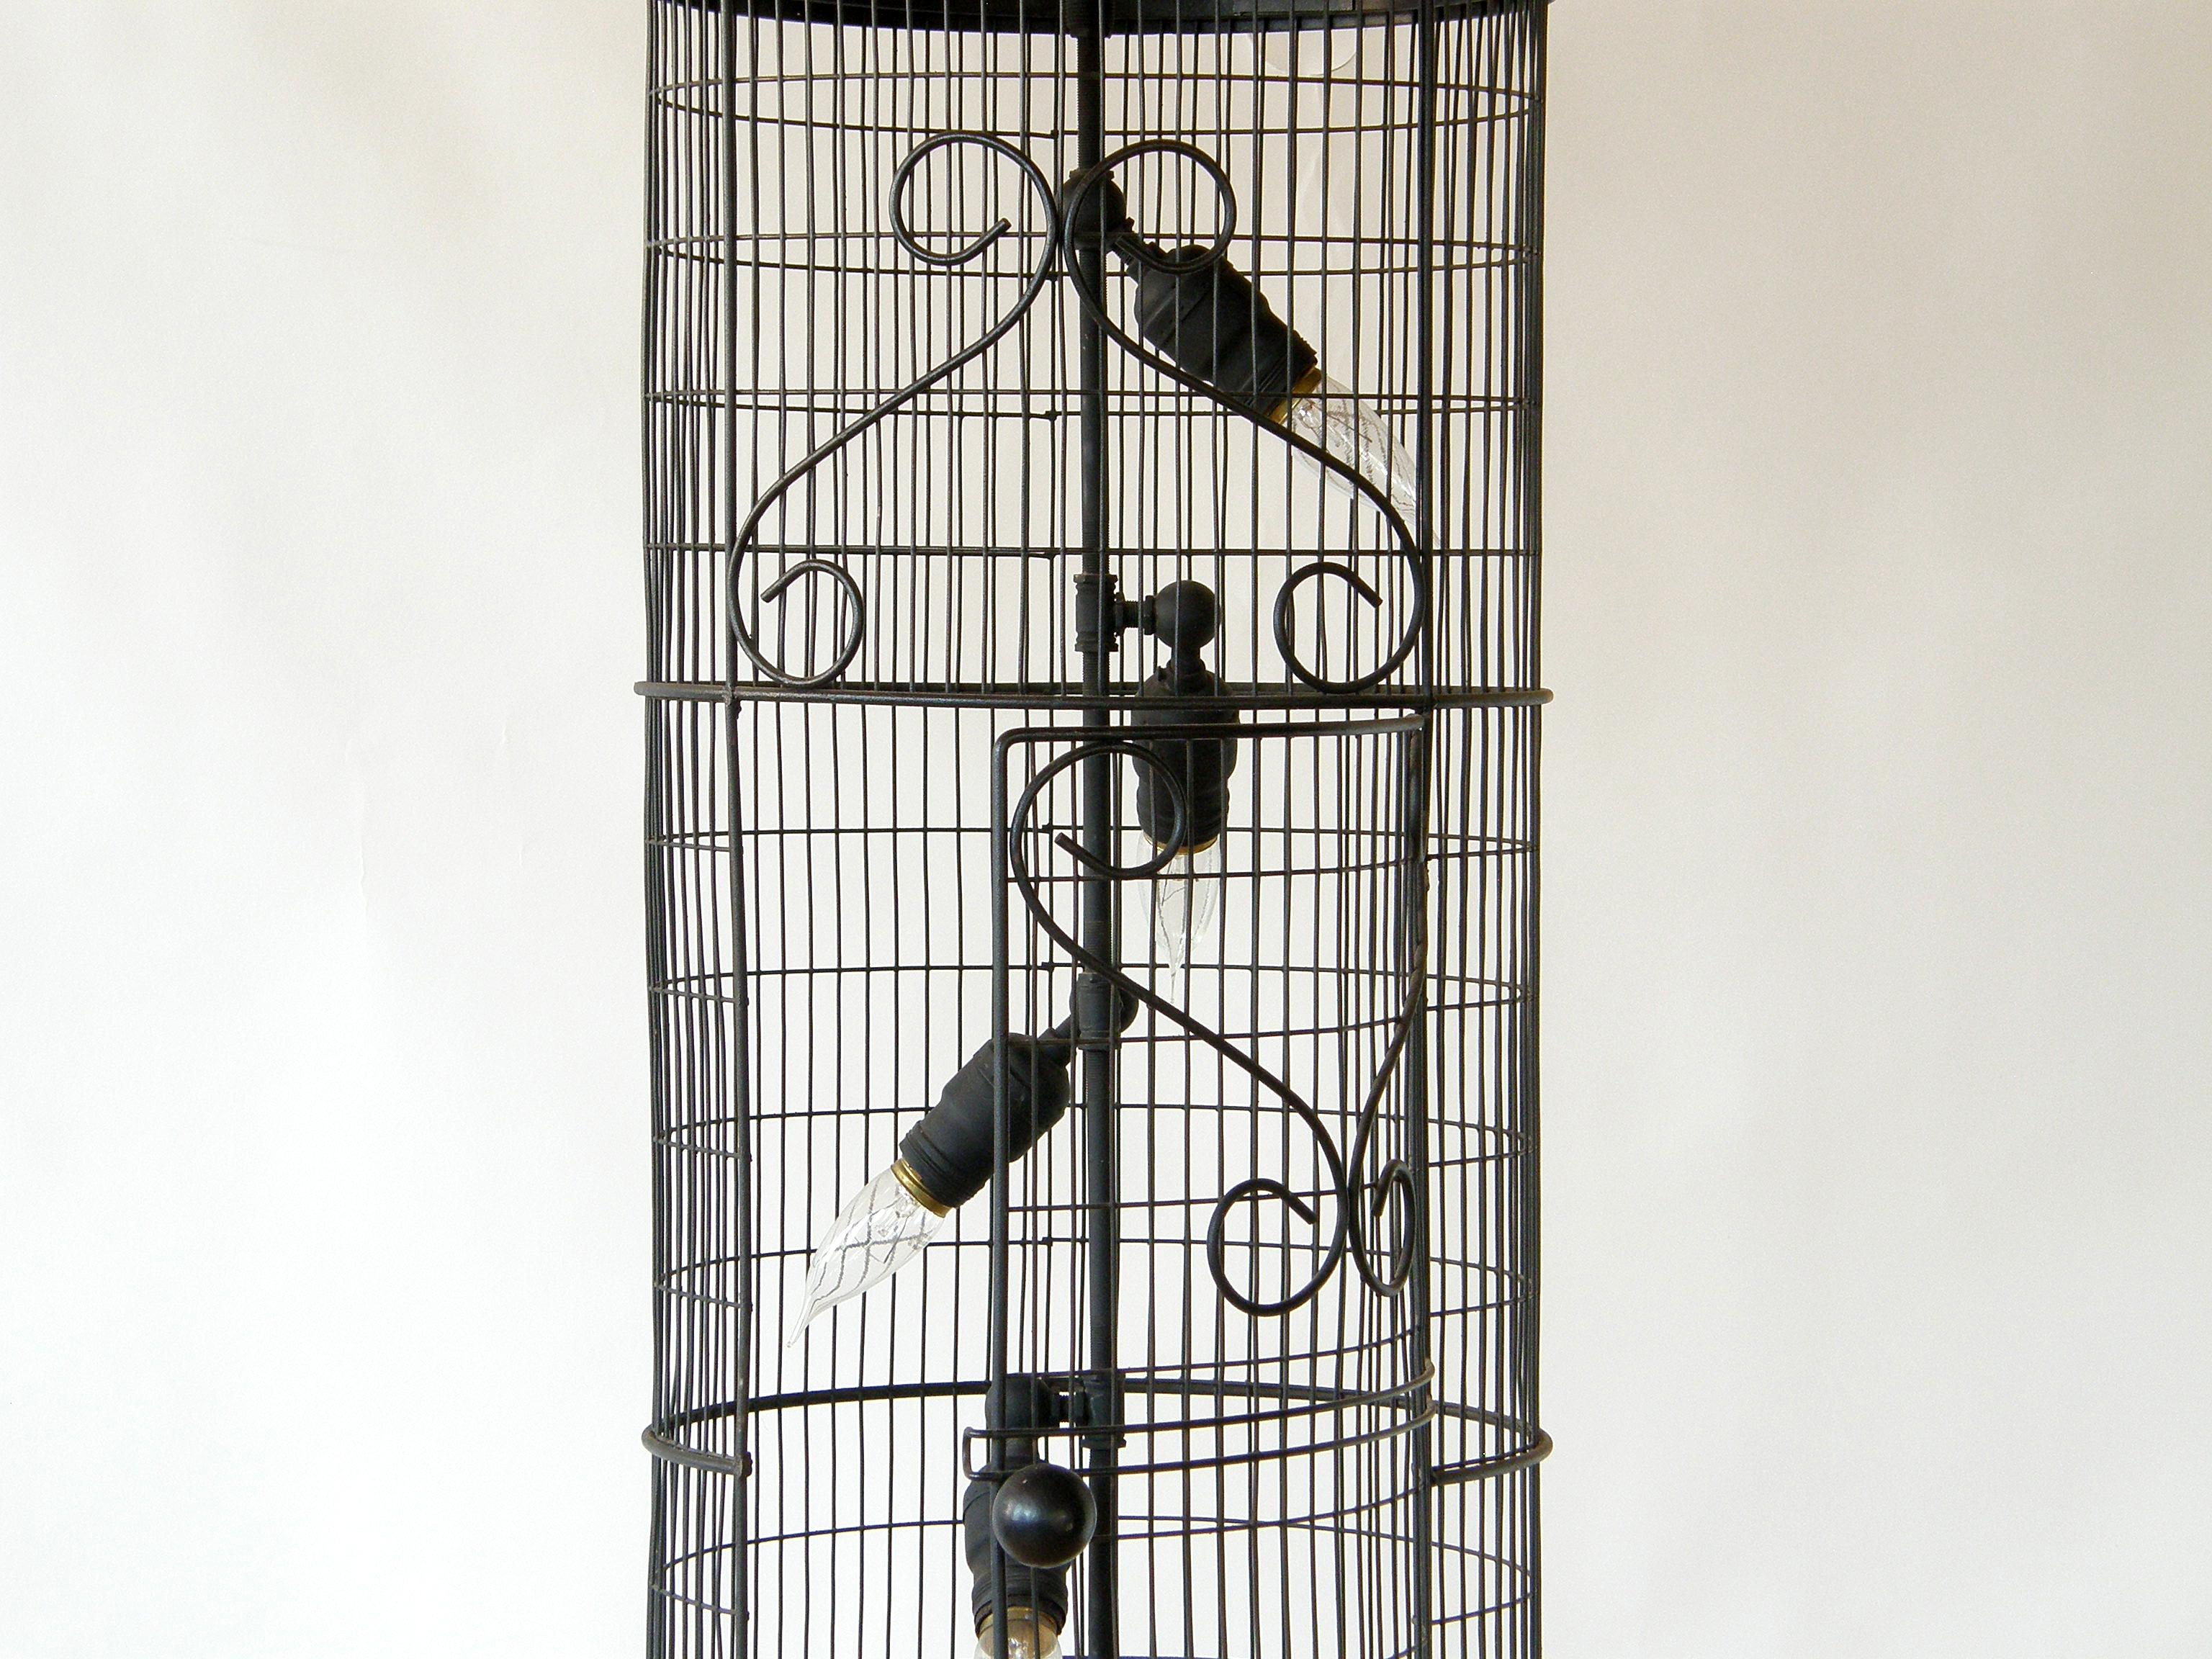 Painted Frederic Weinberg Bird Cage Shaped Planter Hanging Fixture with Onion Dome Top For Sale